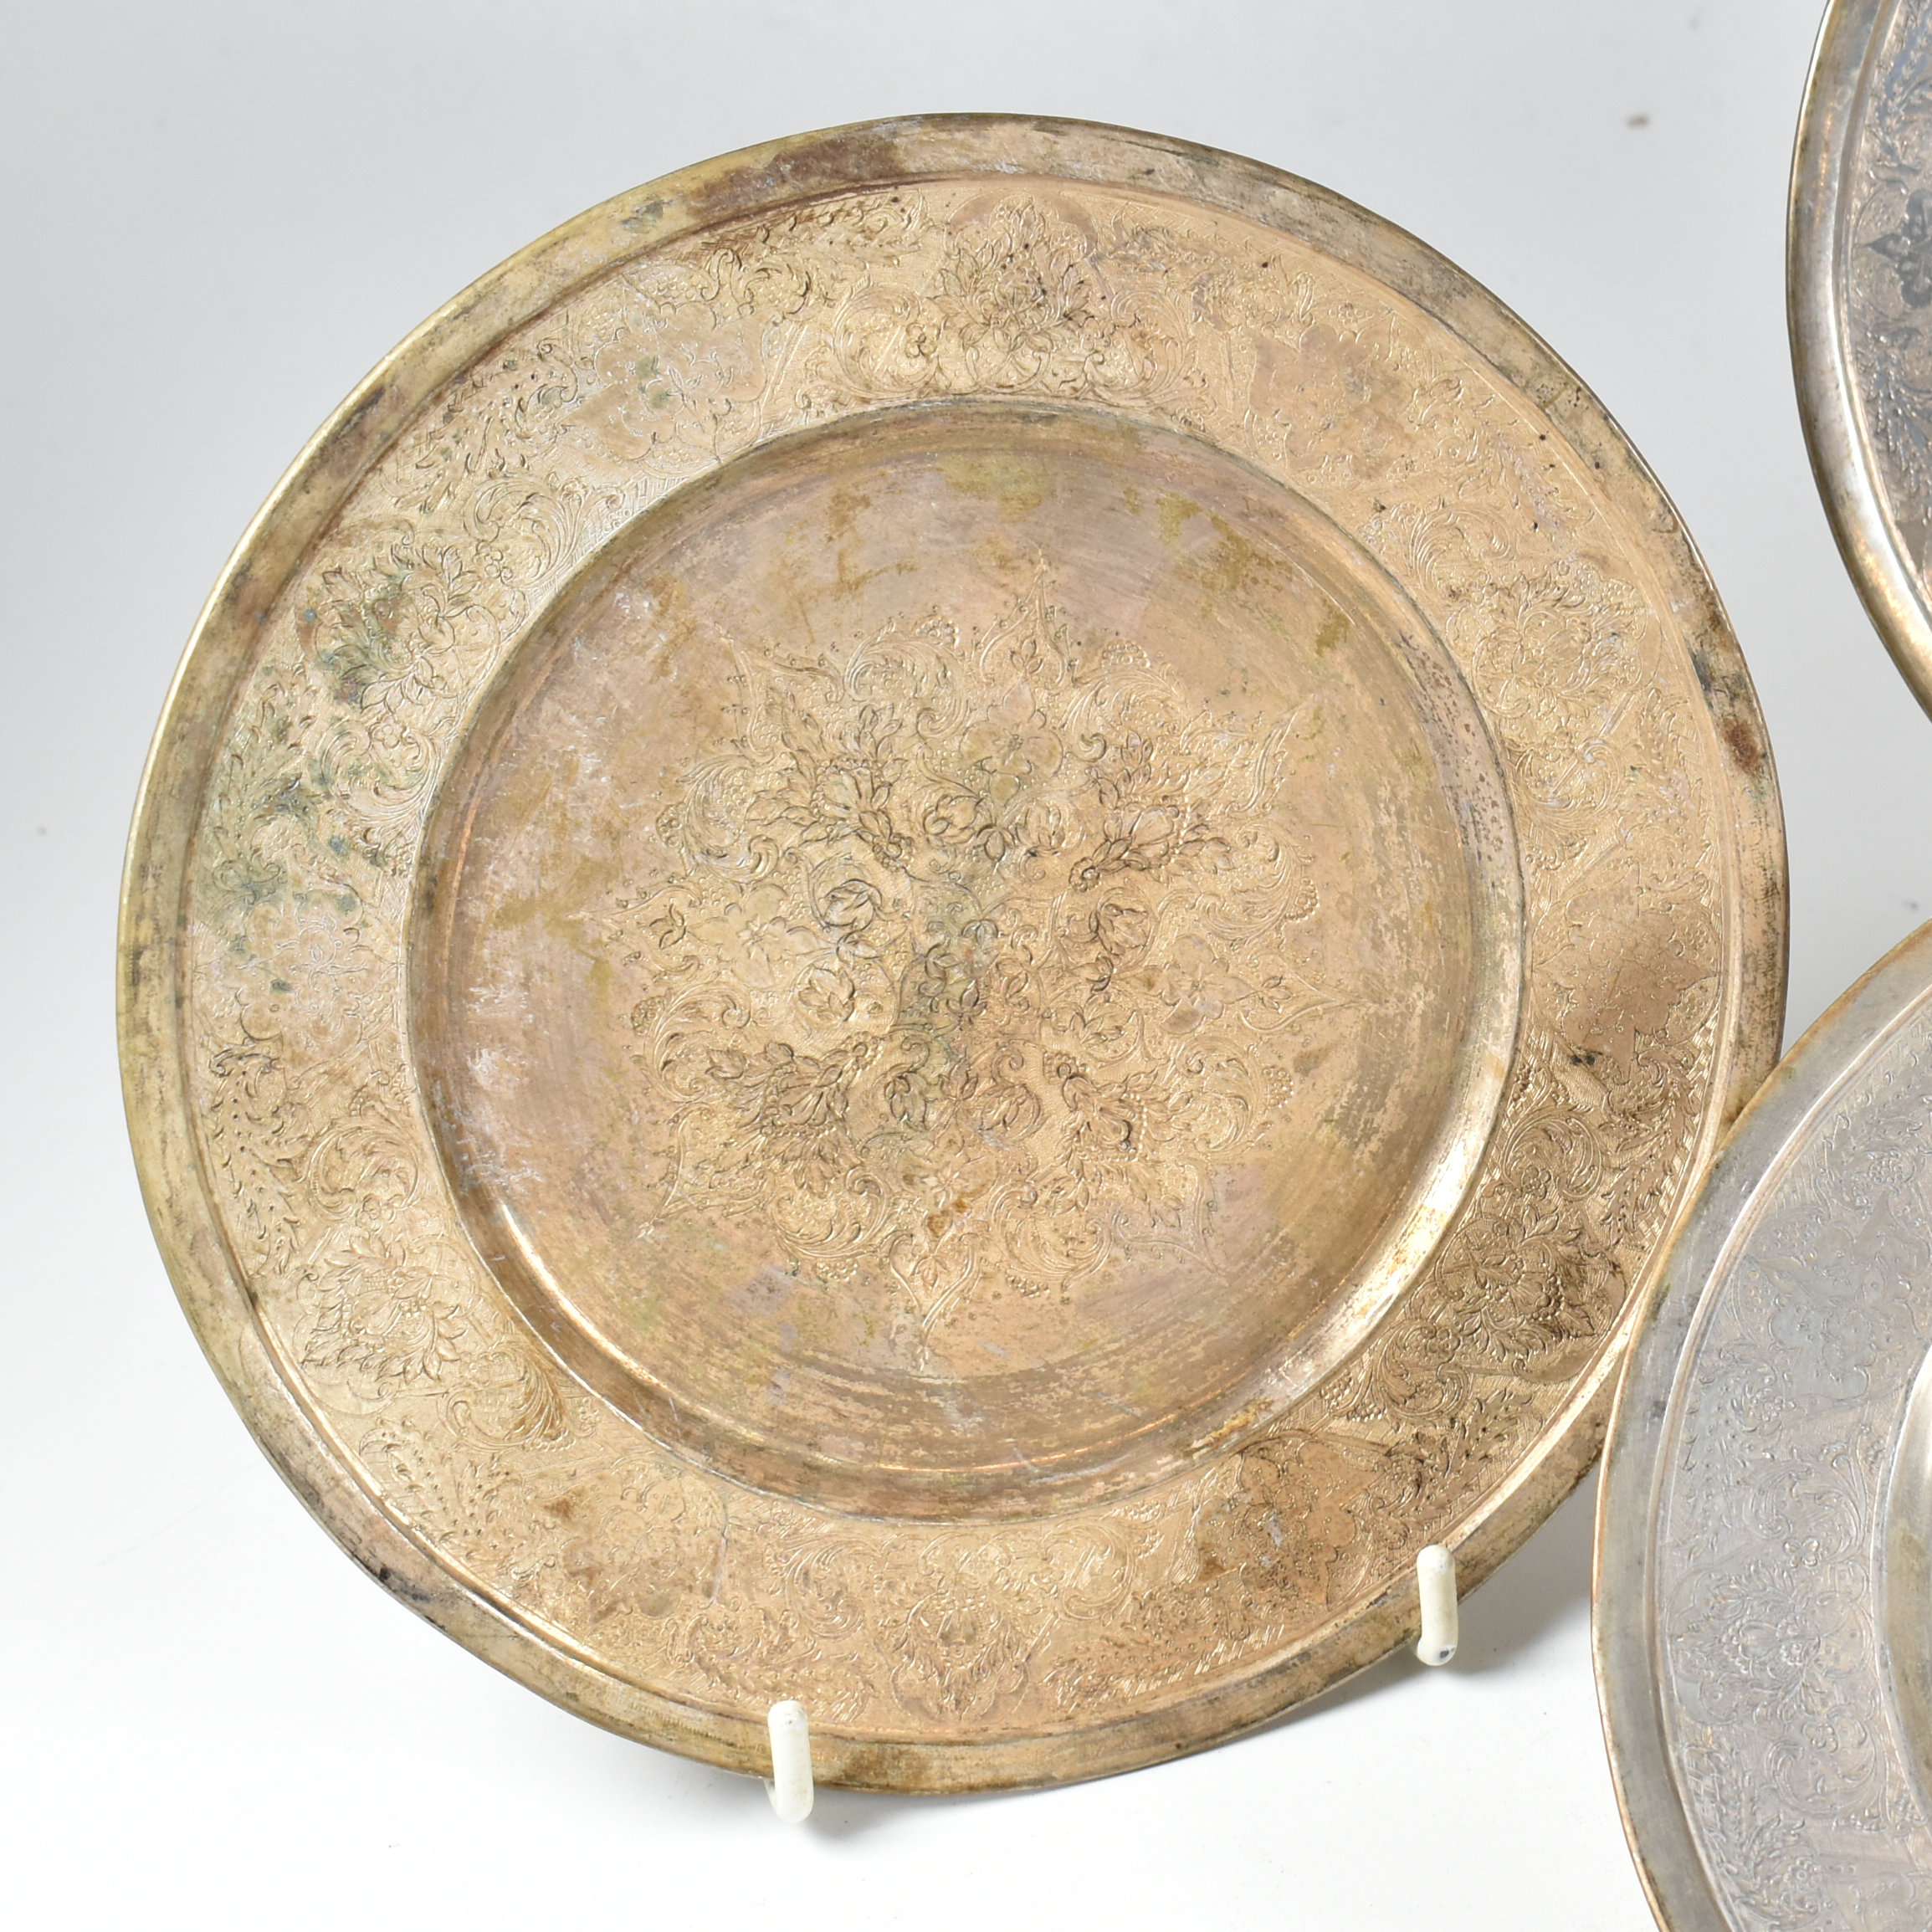 SET OF SIX PERSIAN SILVER SIDE PLATES - Image 5 of 15